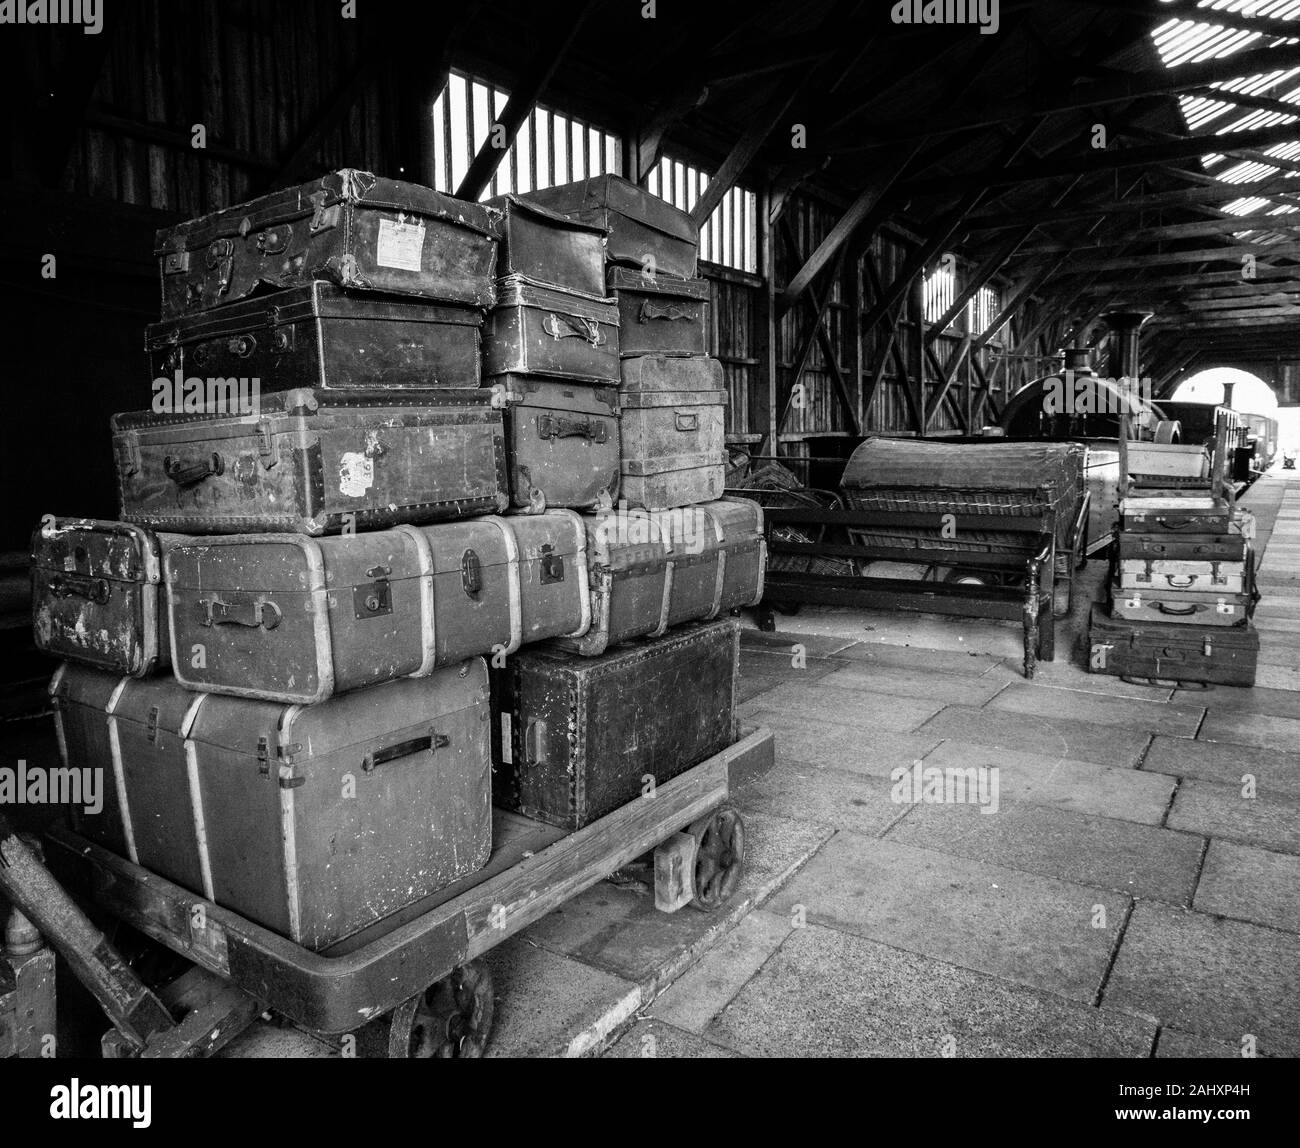 Suitcases at Railway Station, Didcot Railway Centre, Oxfordshire, England, UK, GB. Stock Photo